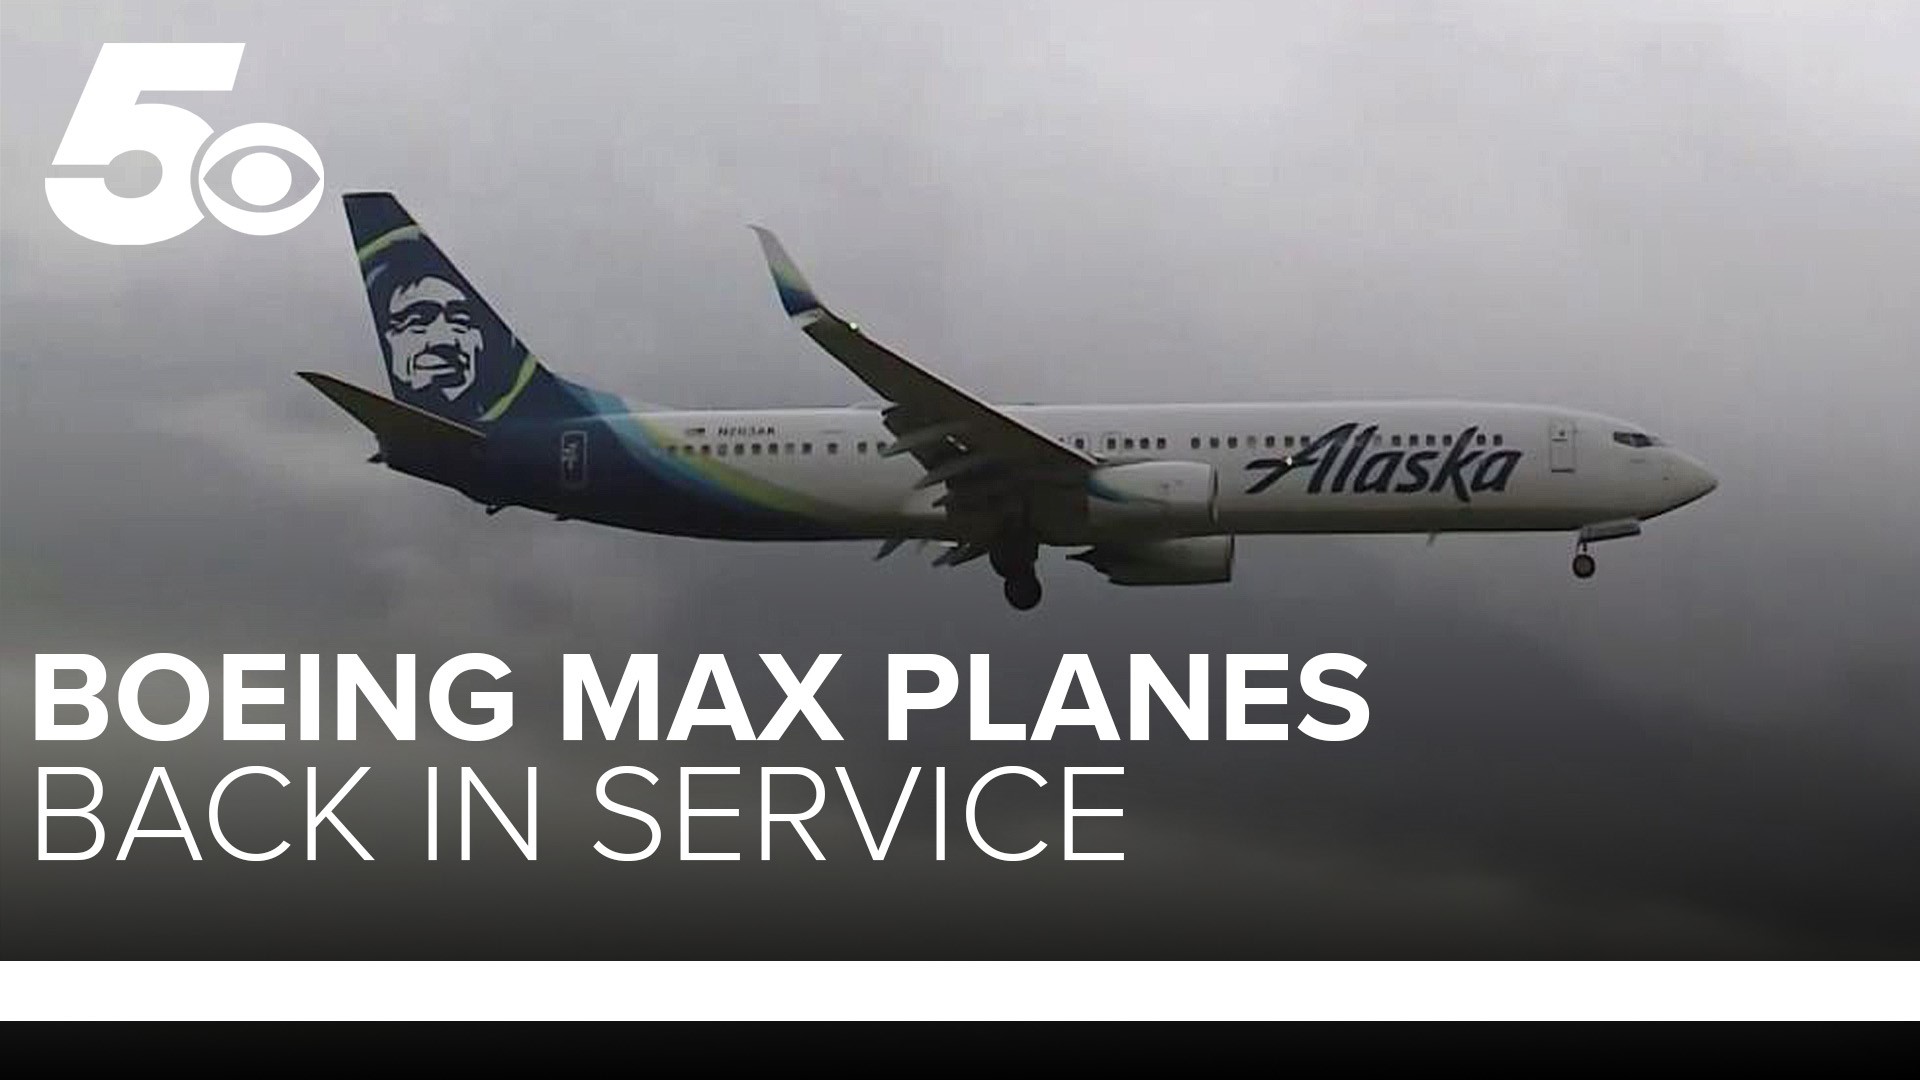 Alaska Airlines is expected to put the Boeing Max 737 jets back in service after a recent door plug blew out midflight. Watch the video to learn more.